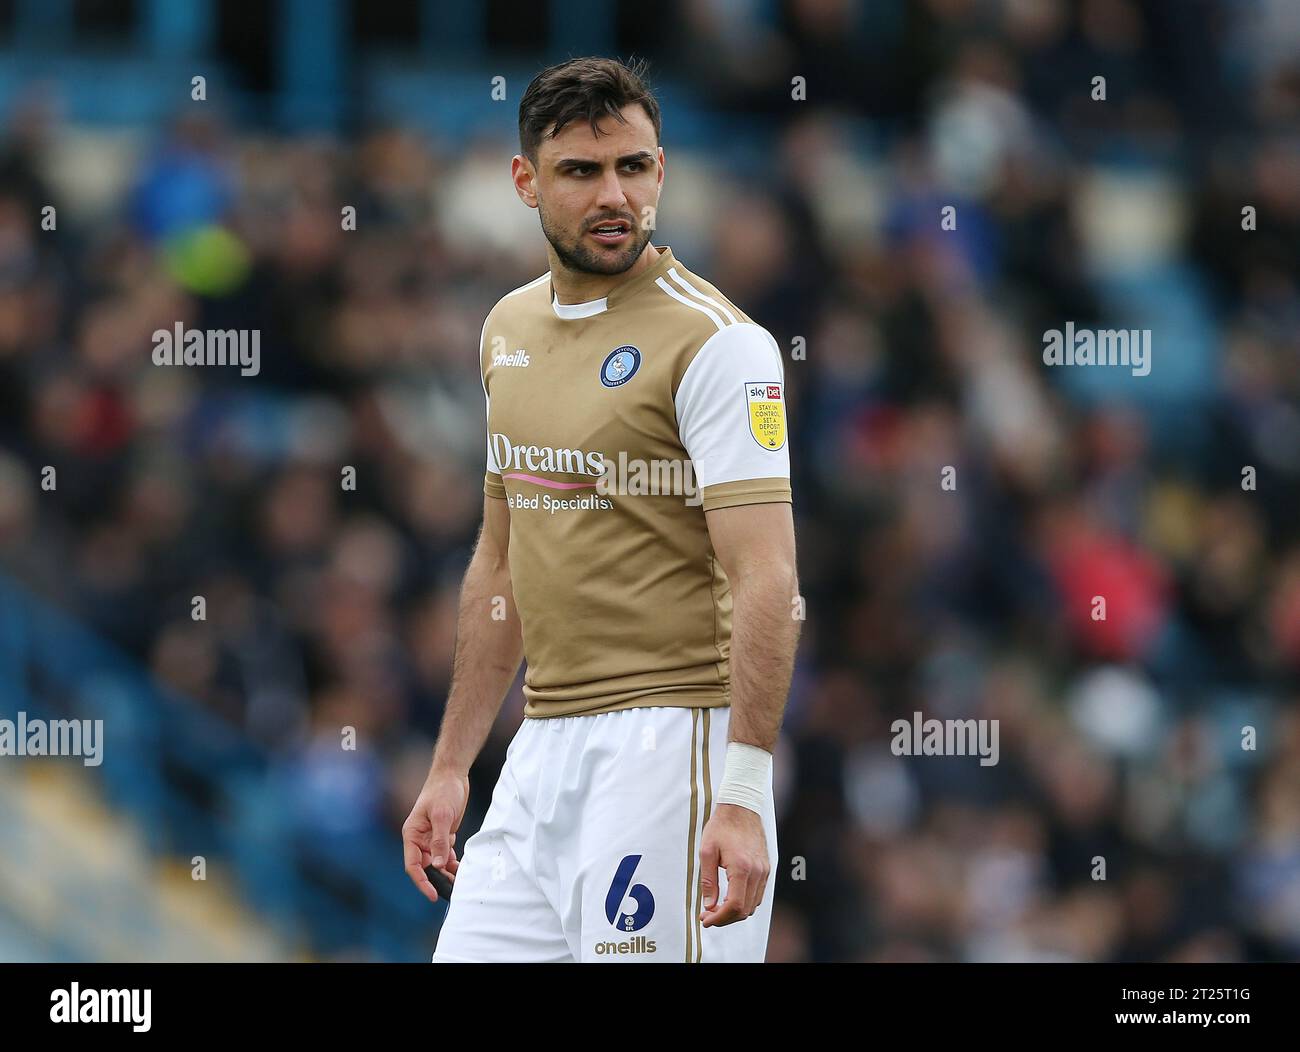 Ryan Tafazolli of Wycombe Wanderers  against Gillingham. - Gillingham v Wycombe Wanderers, Sky Bet League One, Priestfield Stadium, Gillingham, UK - 9th April 2022 Editorial Use Only - DataCo restrictions apply Stock Photo